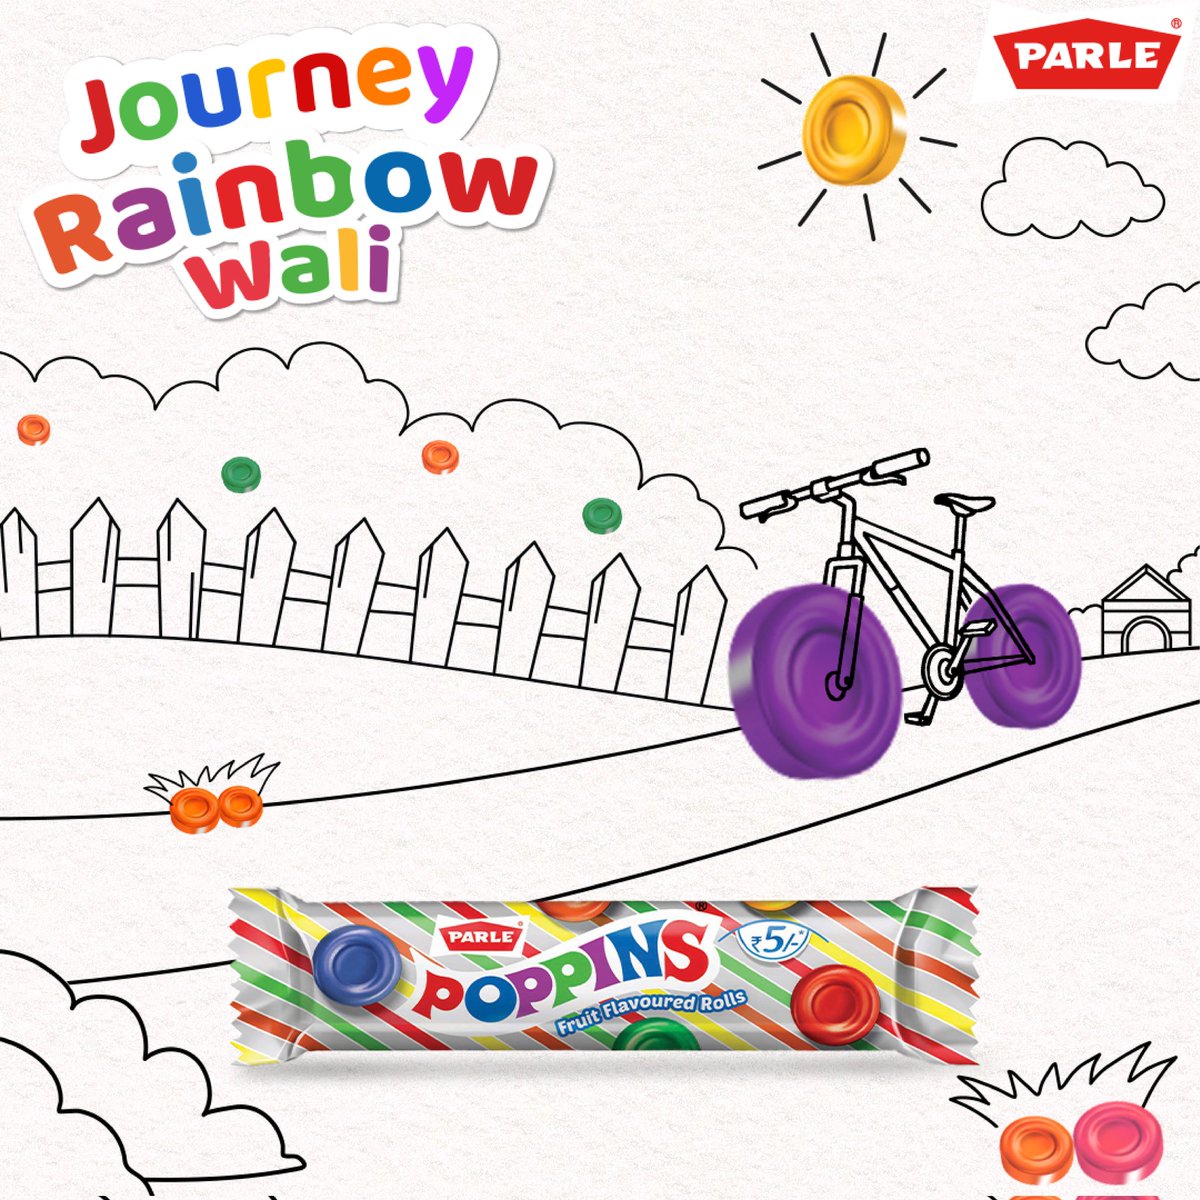 A journey for all ages. #ParleProducts #ParleFamily #ParleConfectionery #ParlePoppins #Poppins #Satrangi #Goli #Play #Fun #Rainbow